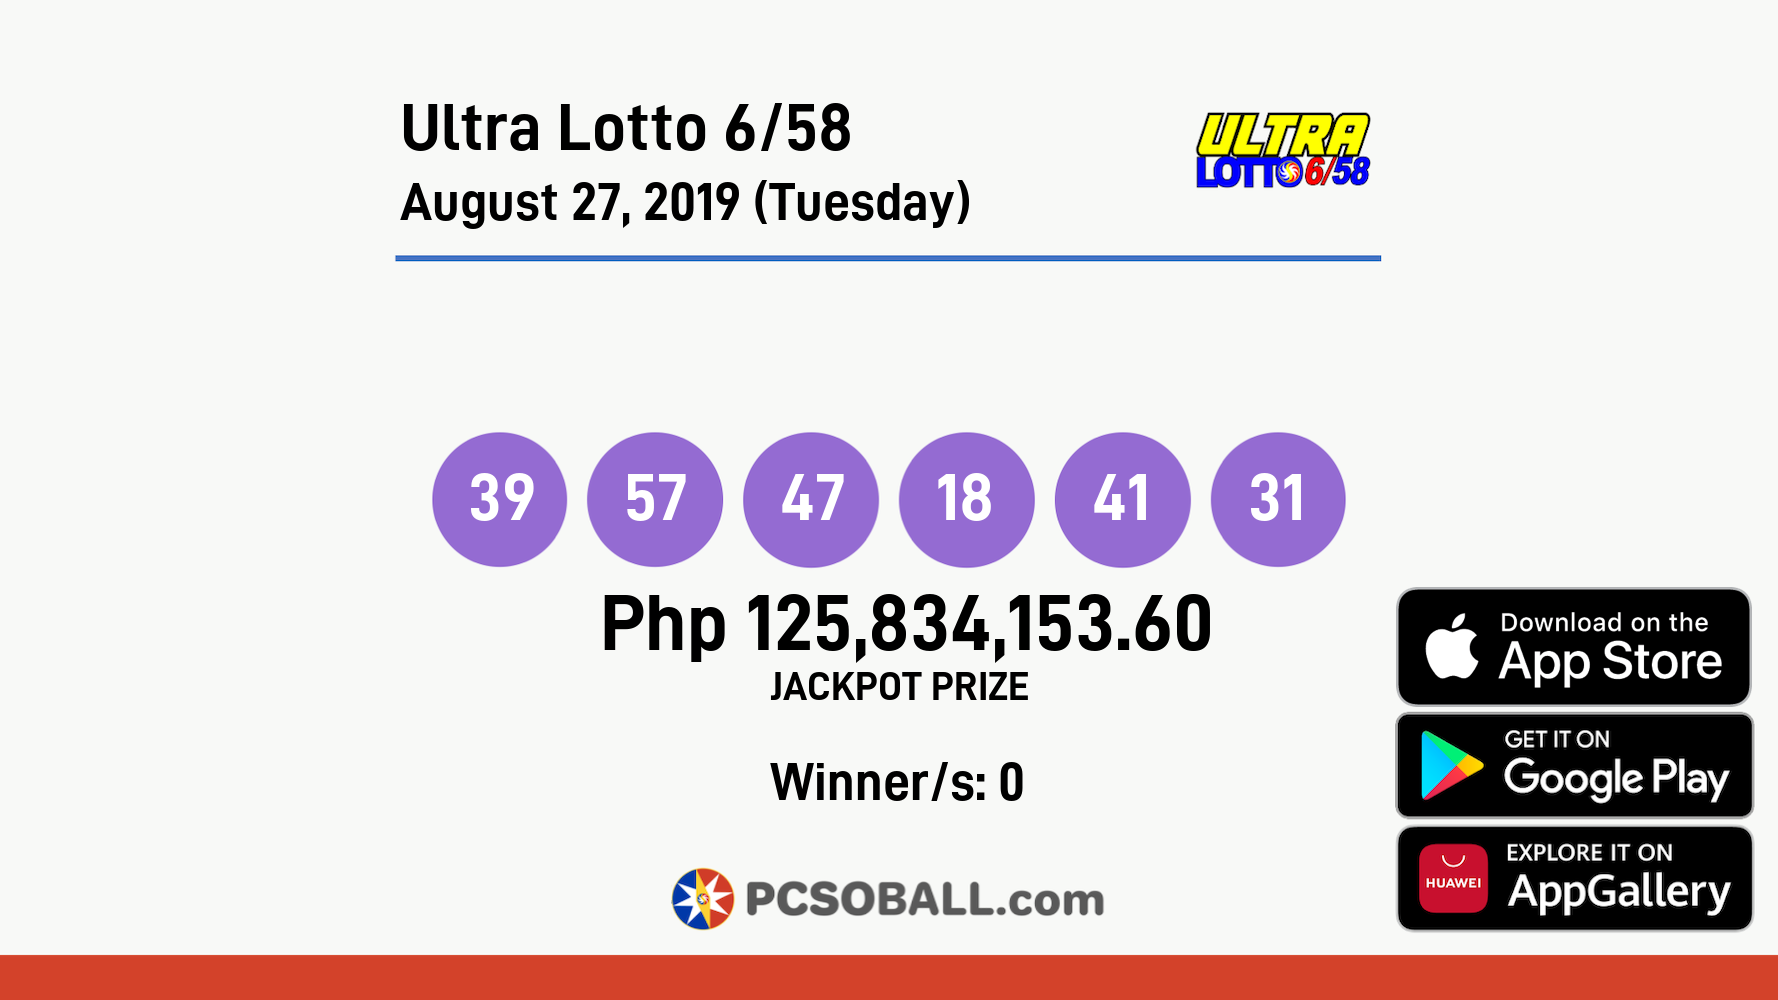 Ultra Lotto 6/58 August 27, 2019 (Tuesday) Result